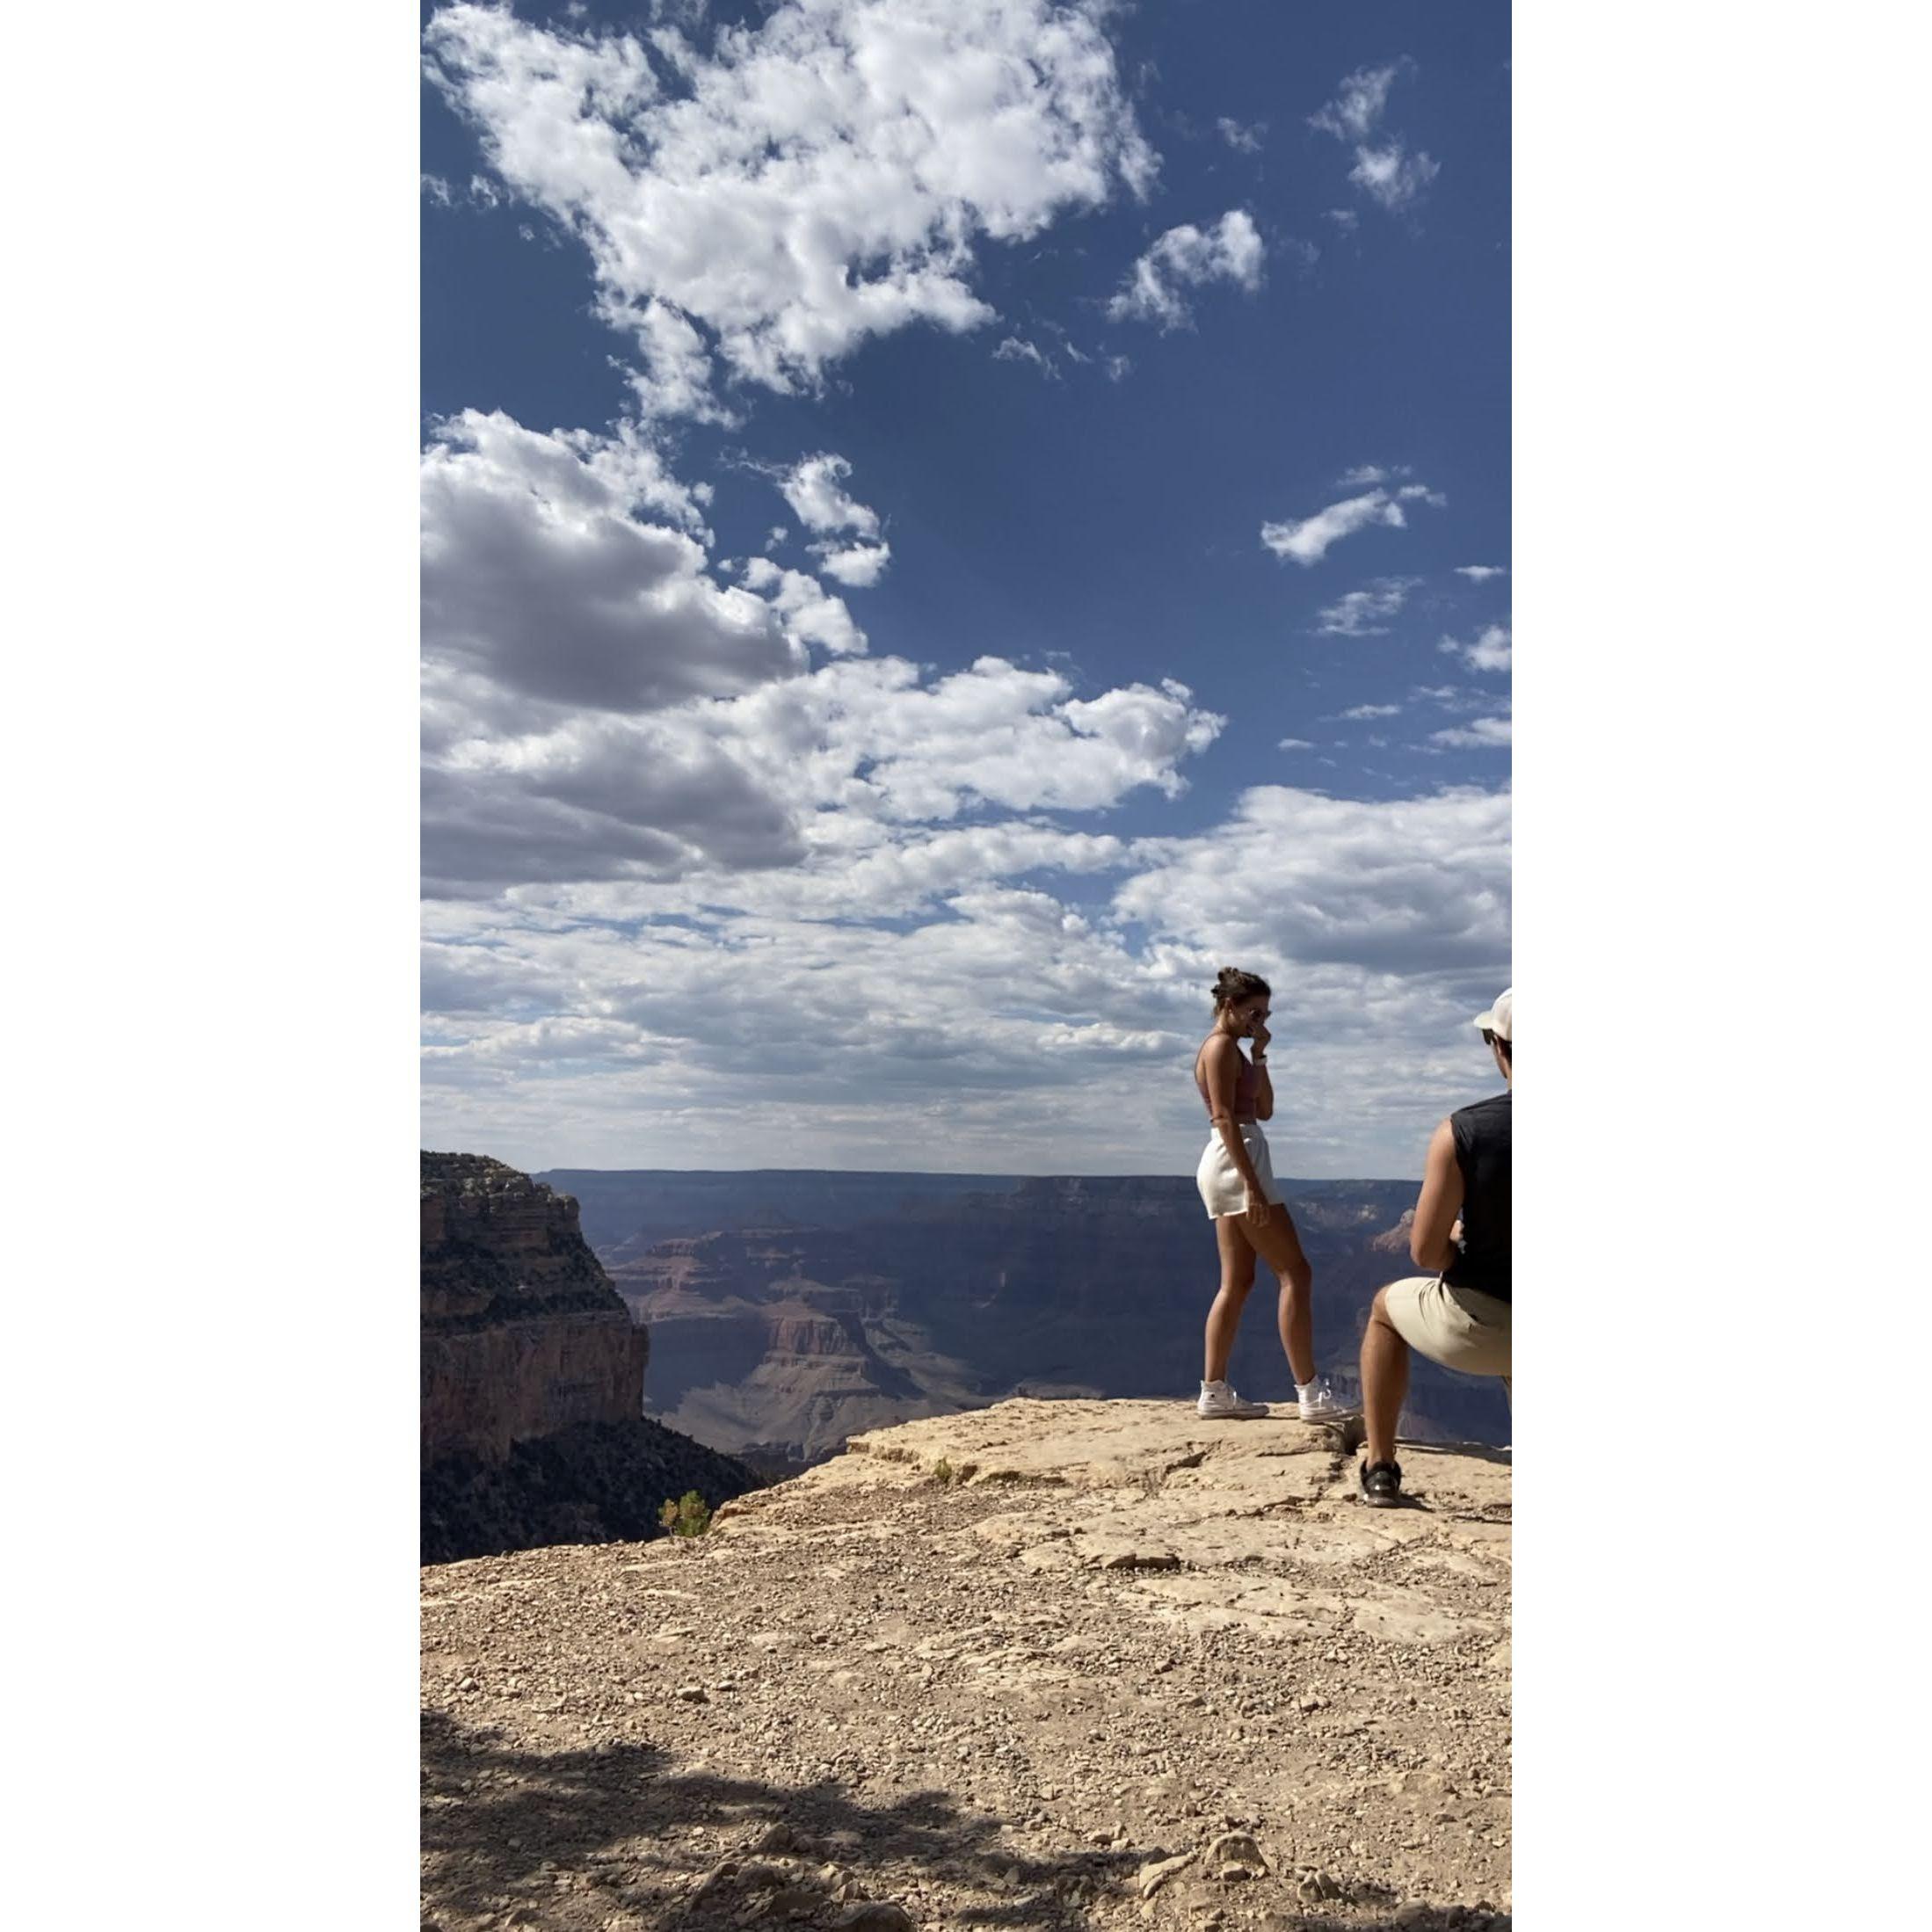 Troy FINALLY popped the question at the Grand Canyon